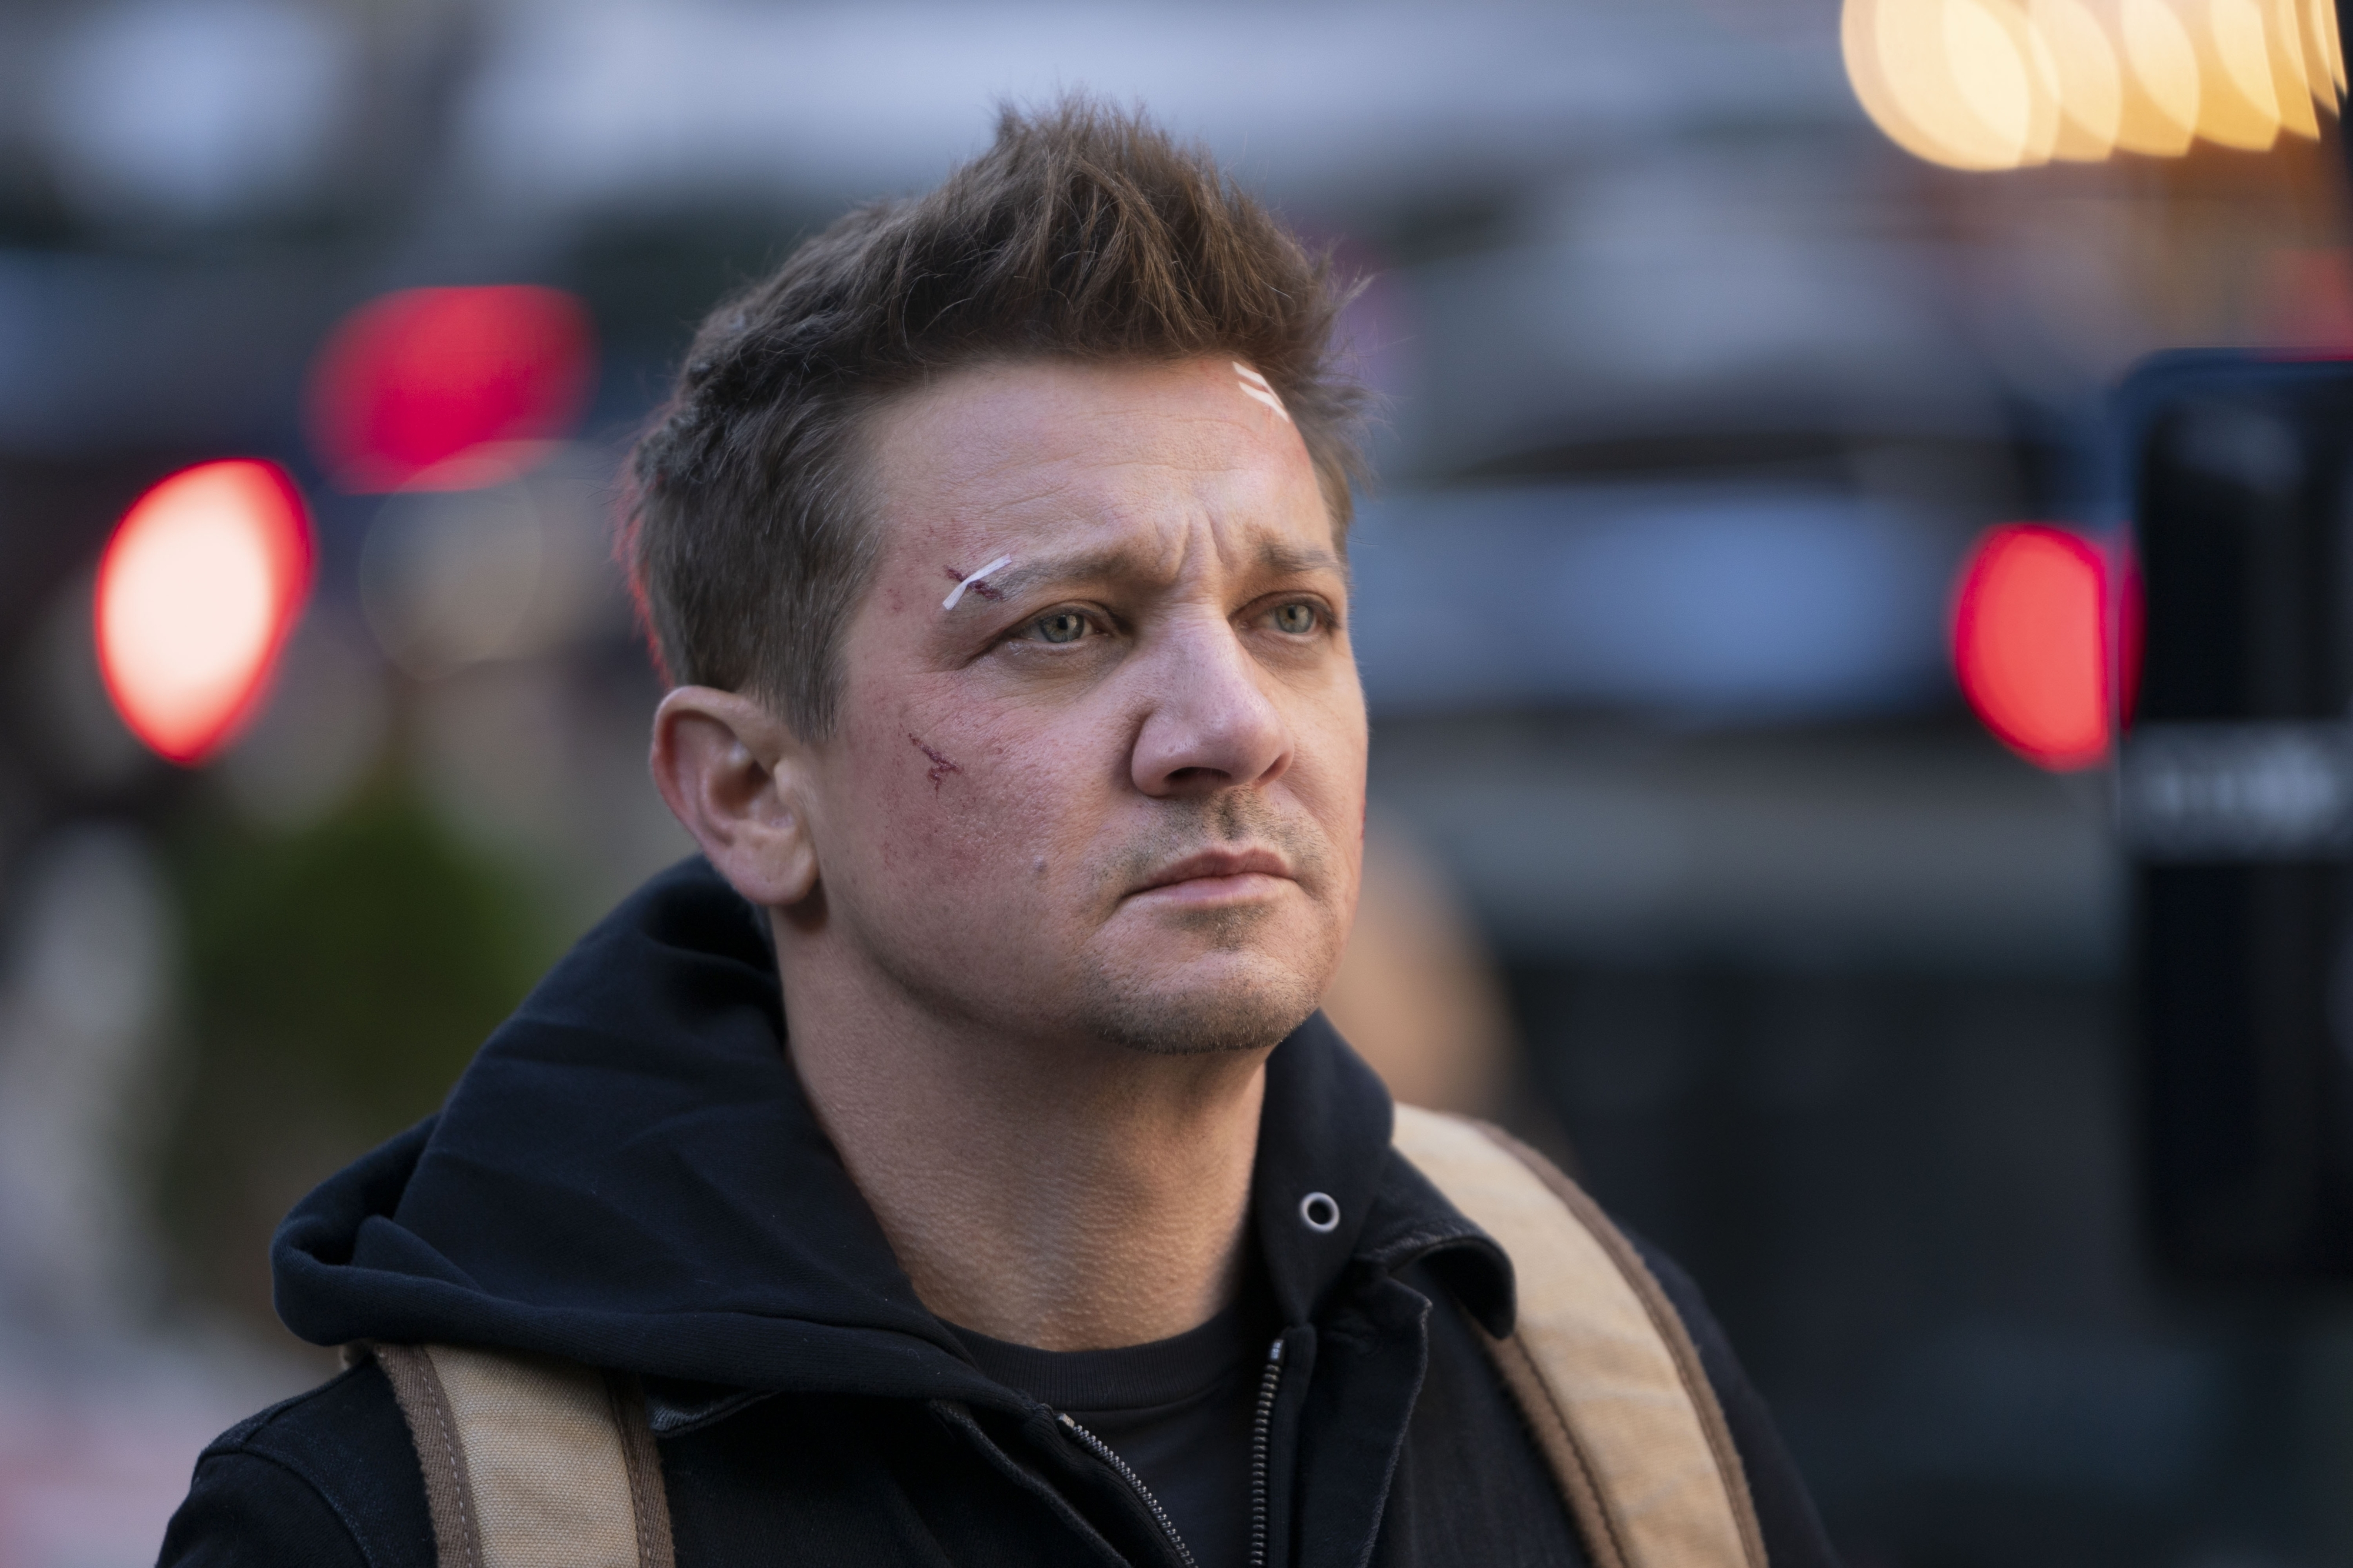 130+ Clint Barton HD Wallpapers and Backgrounds